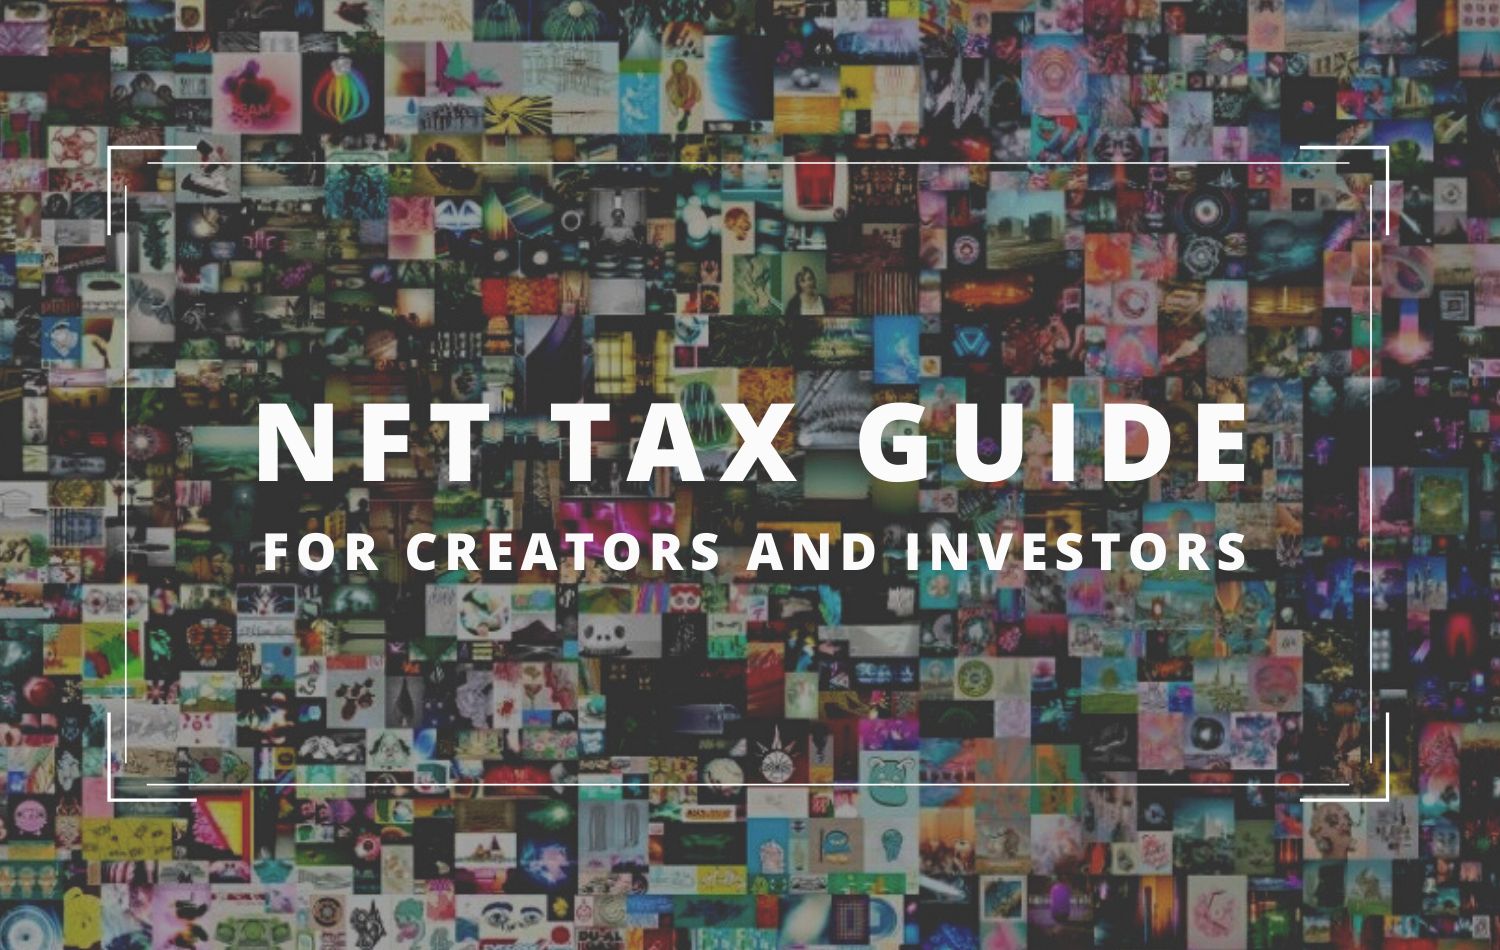 Japan Updates Its NFT Taxation Rules And Guidelines